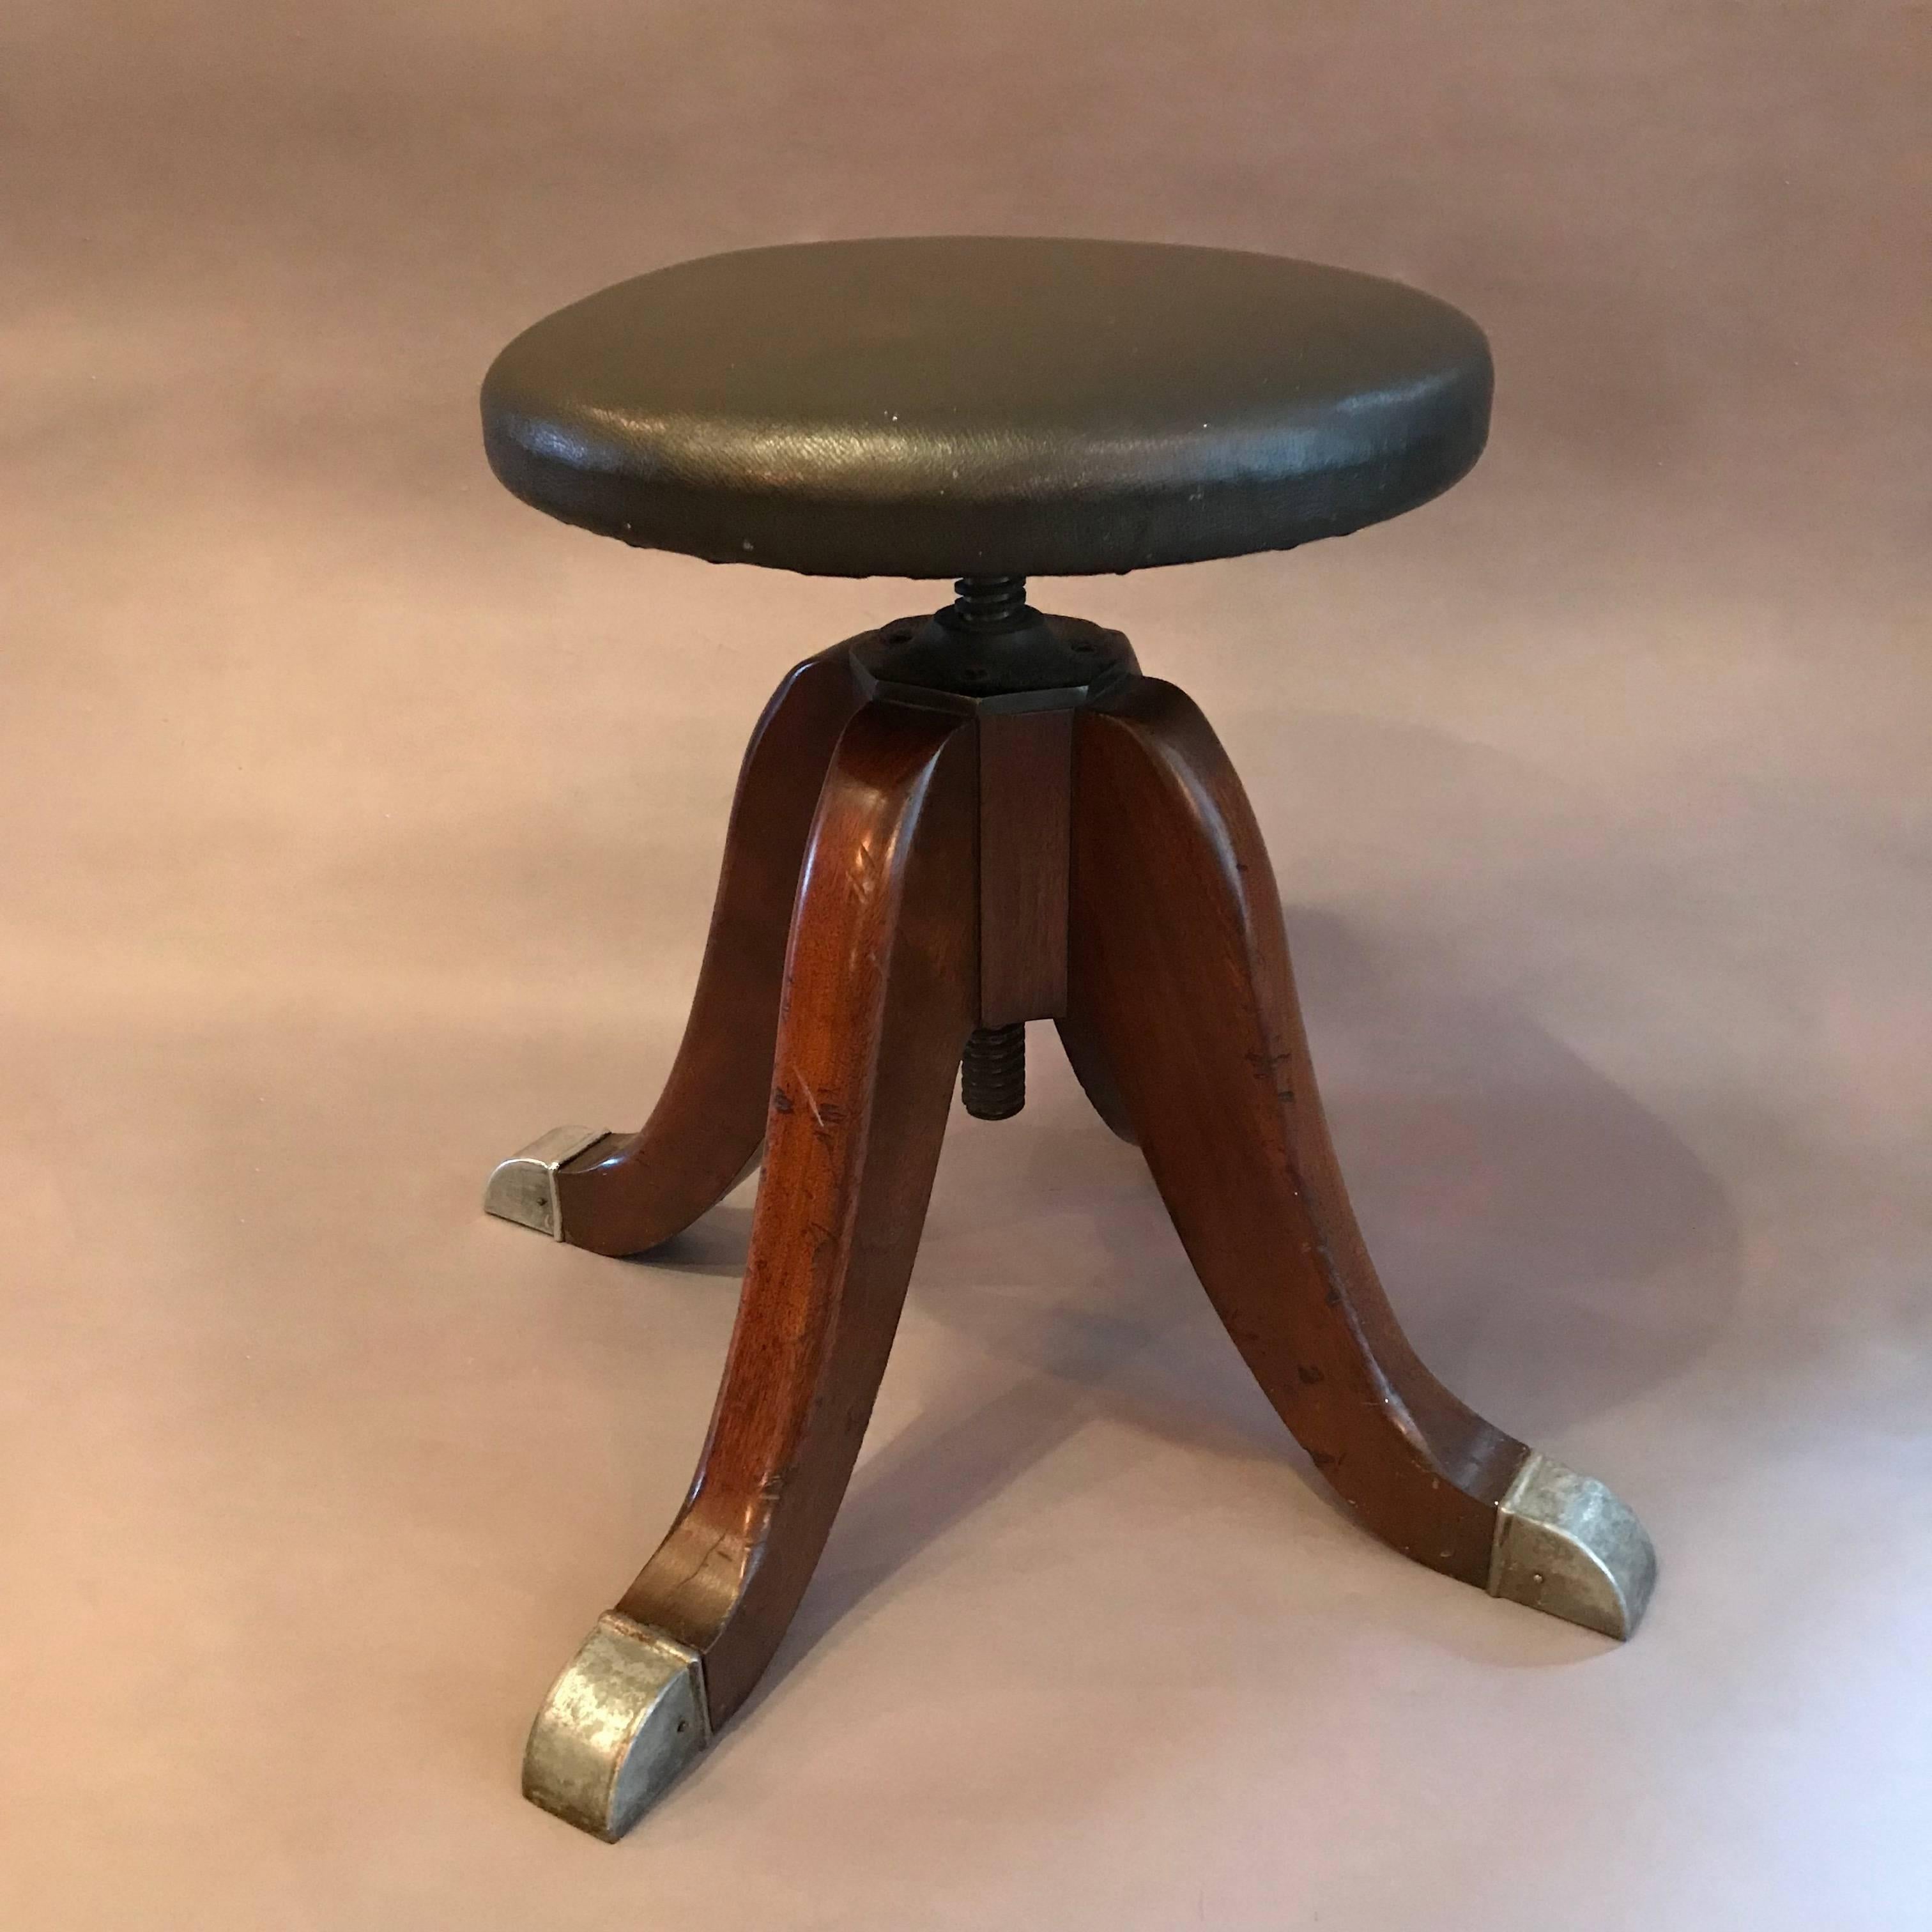 1930s, swivel, medical, optometry examination stool features a black leather seat, wood legs with steel tips. Measure: Seat height is adjustable from 17 - 22 inches.